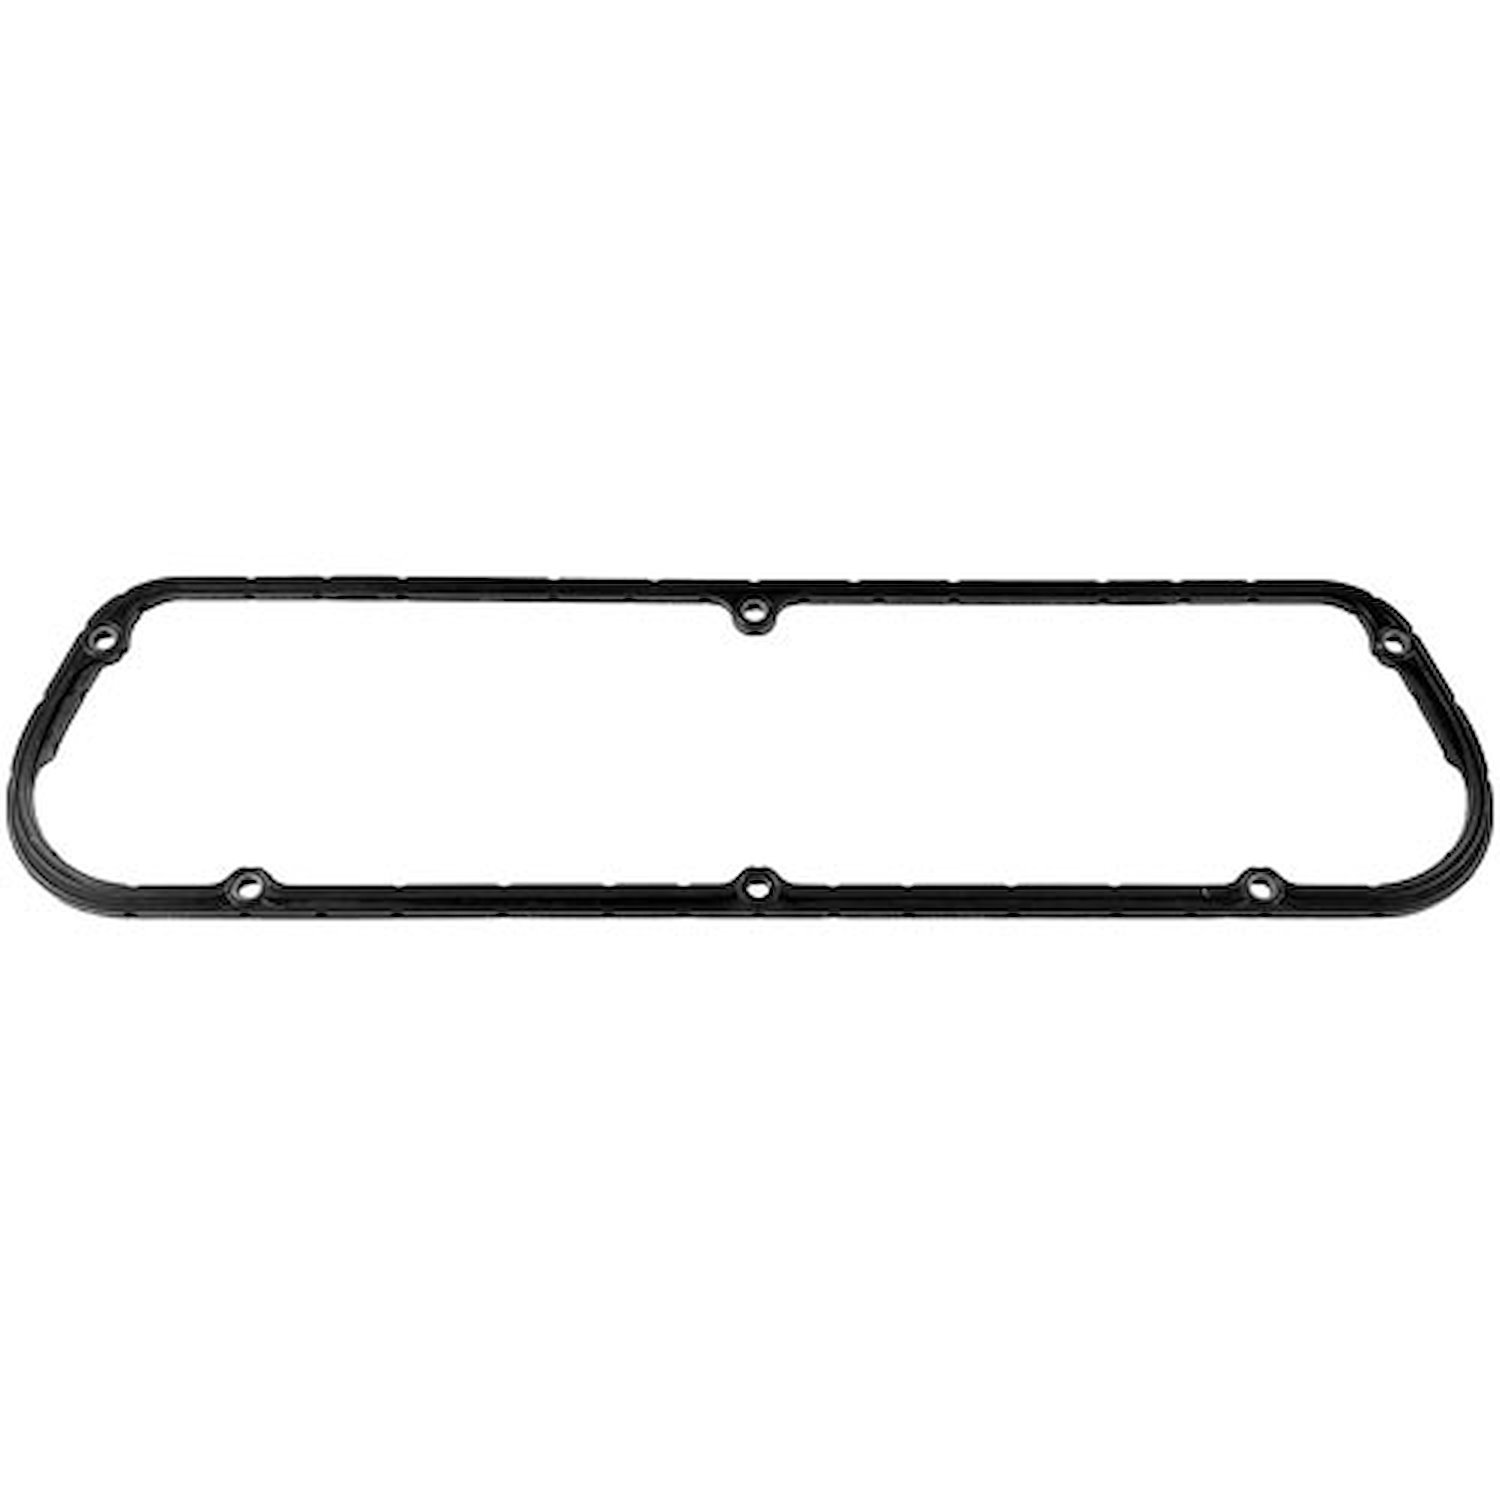 C5974 Valve Cover Gasket for Ford Small Block 289/302/351W